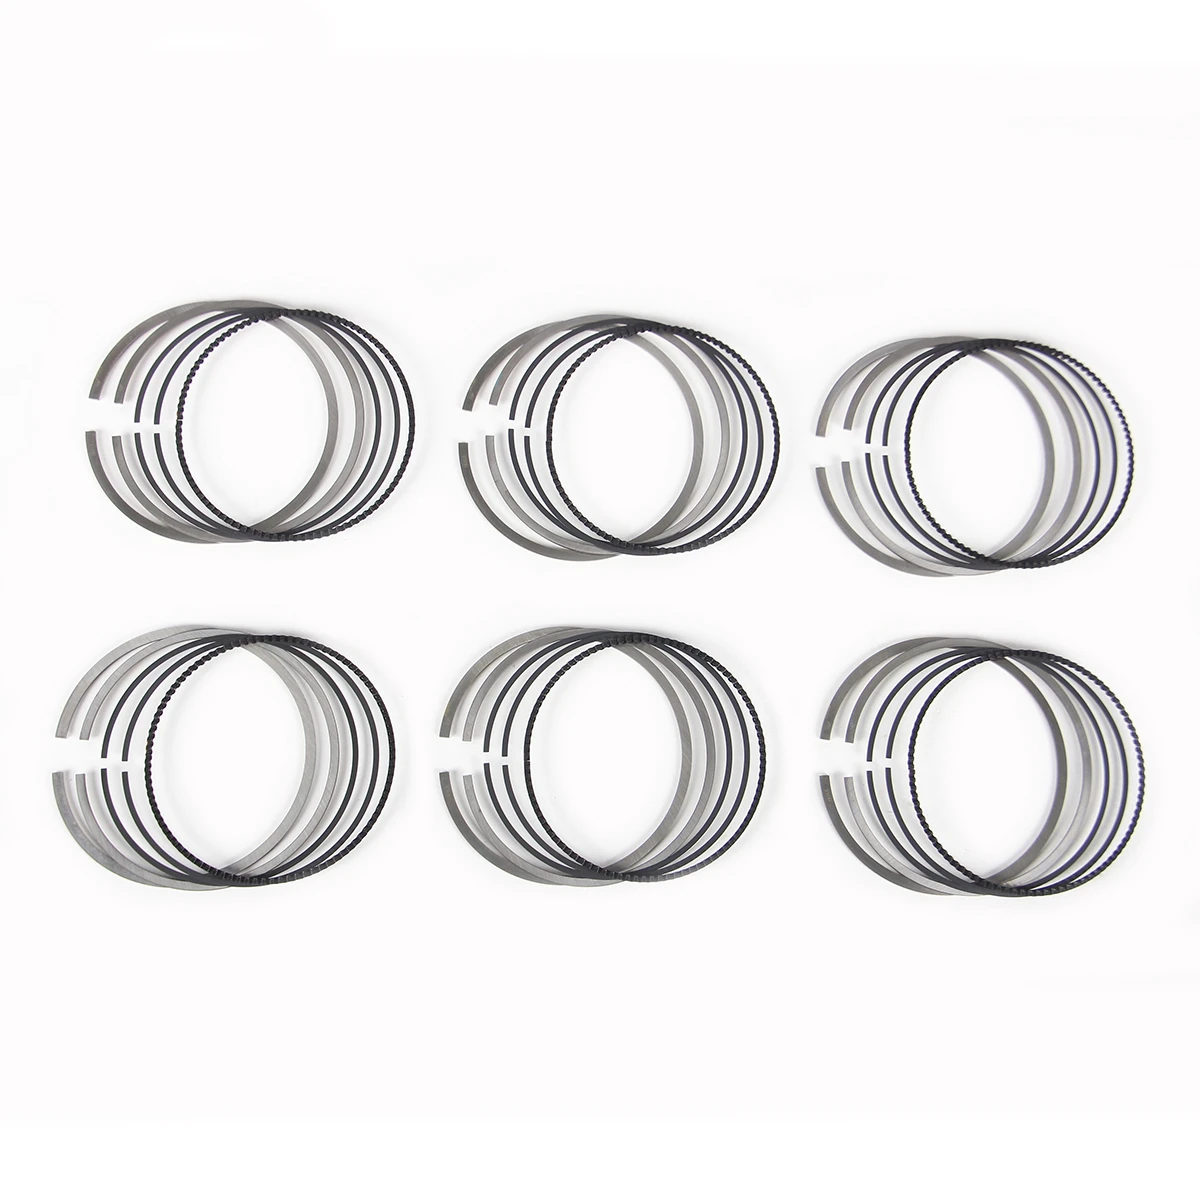 

A2720308917 3.5L Piston Ring Kit Fit For Mercedes-Benz C350 W203 W204 CLK350 A209 C209 CLS350 C219 E350 W211 W212